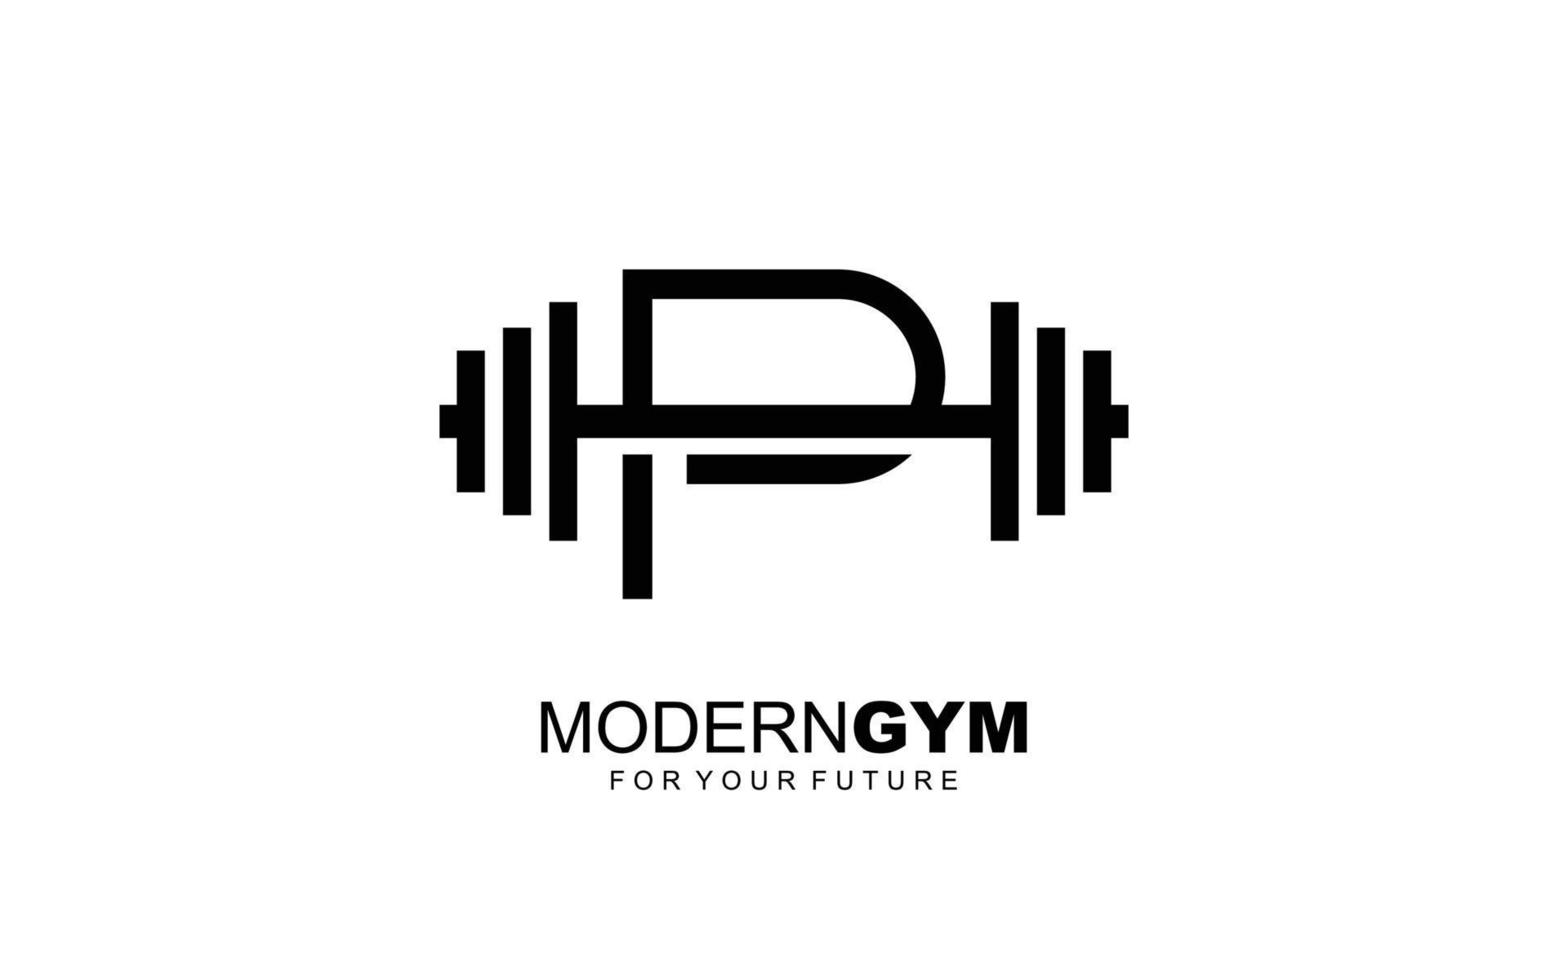 P logo gym vector for identity company. initial letter fitness template vector illustration for your brand.